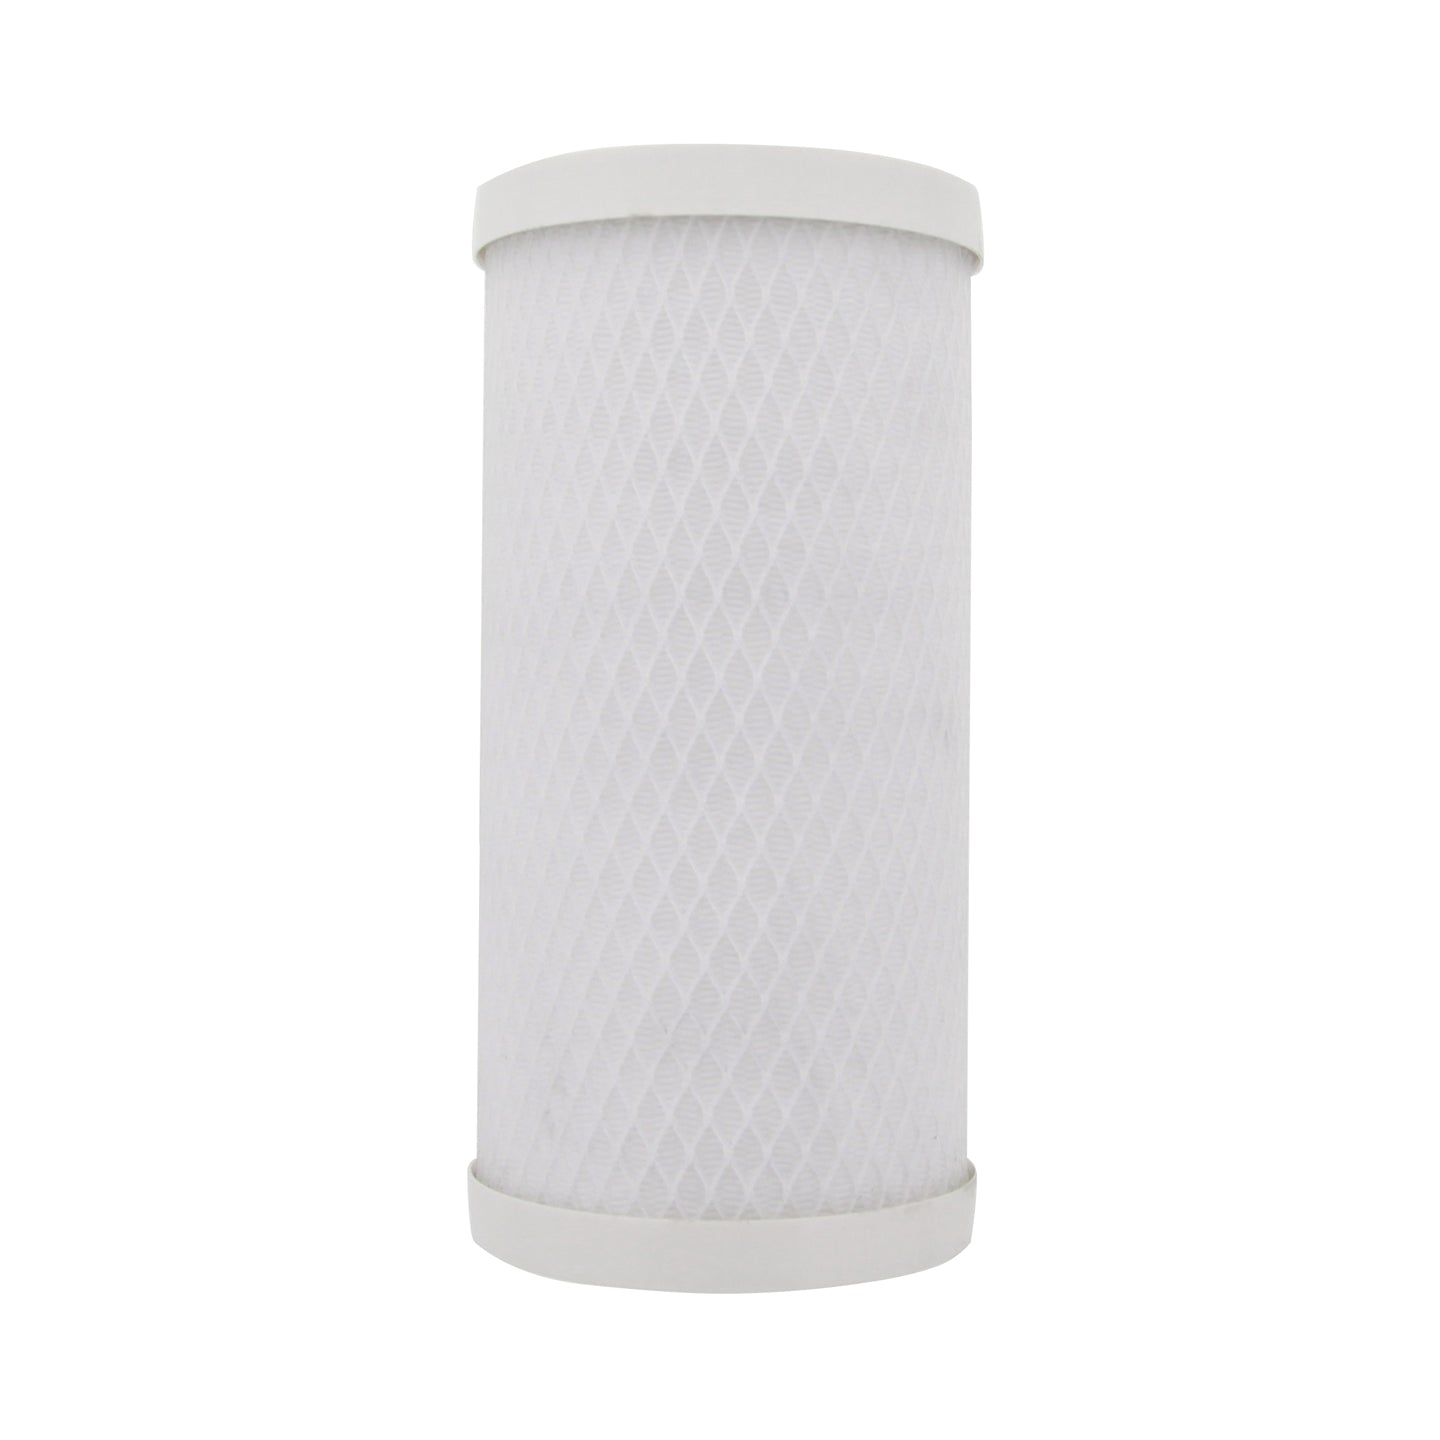 10 X 4.5 Carbon Block Replacement Filter by Tier1 (0.5 micron)